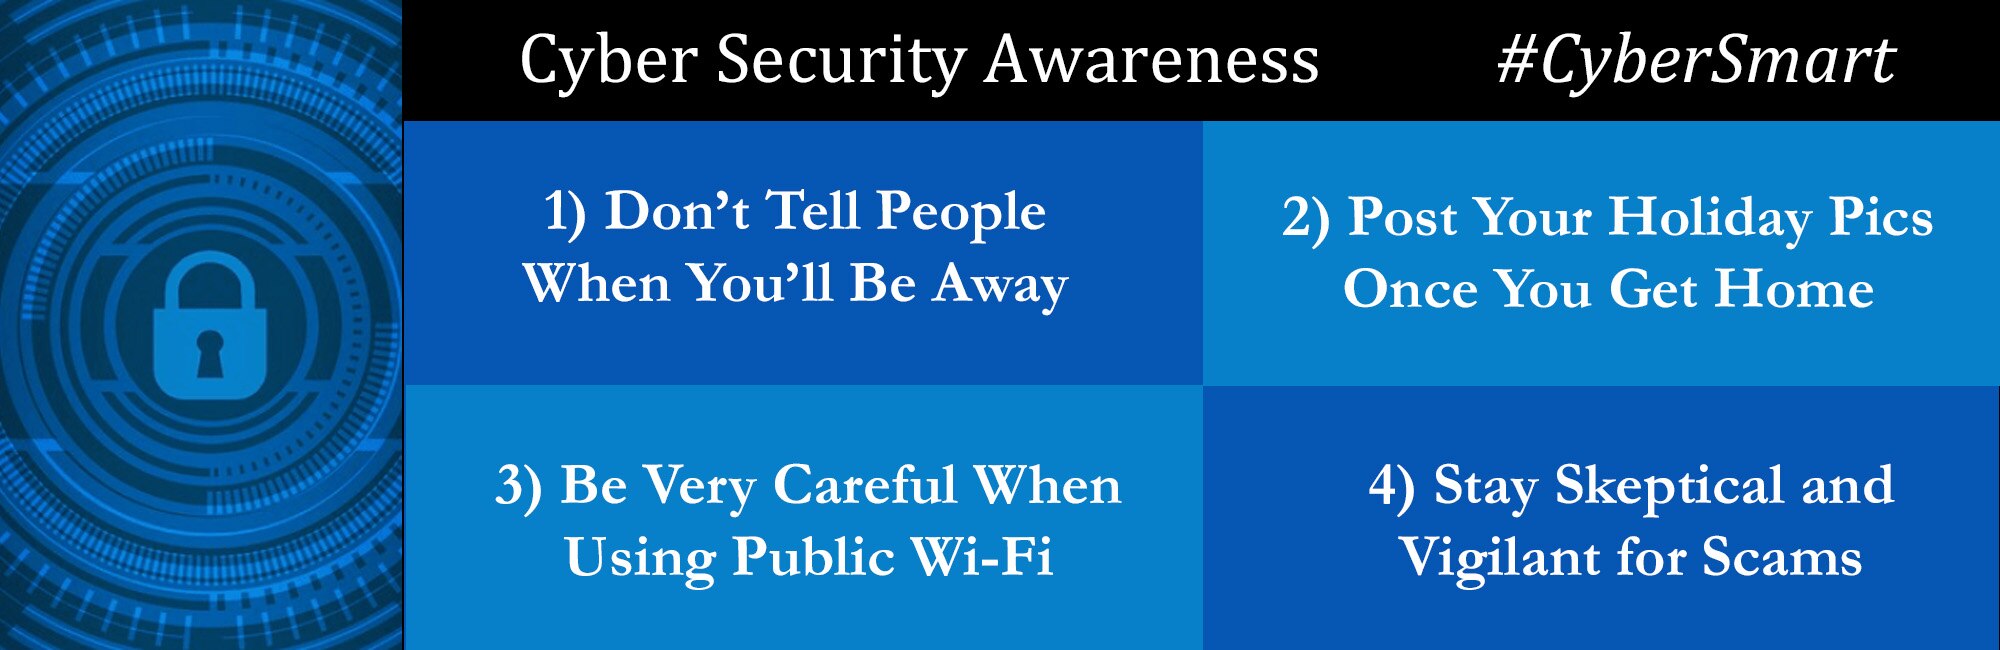 Graphic with Cyber Security tips